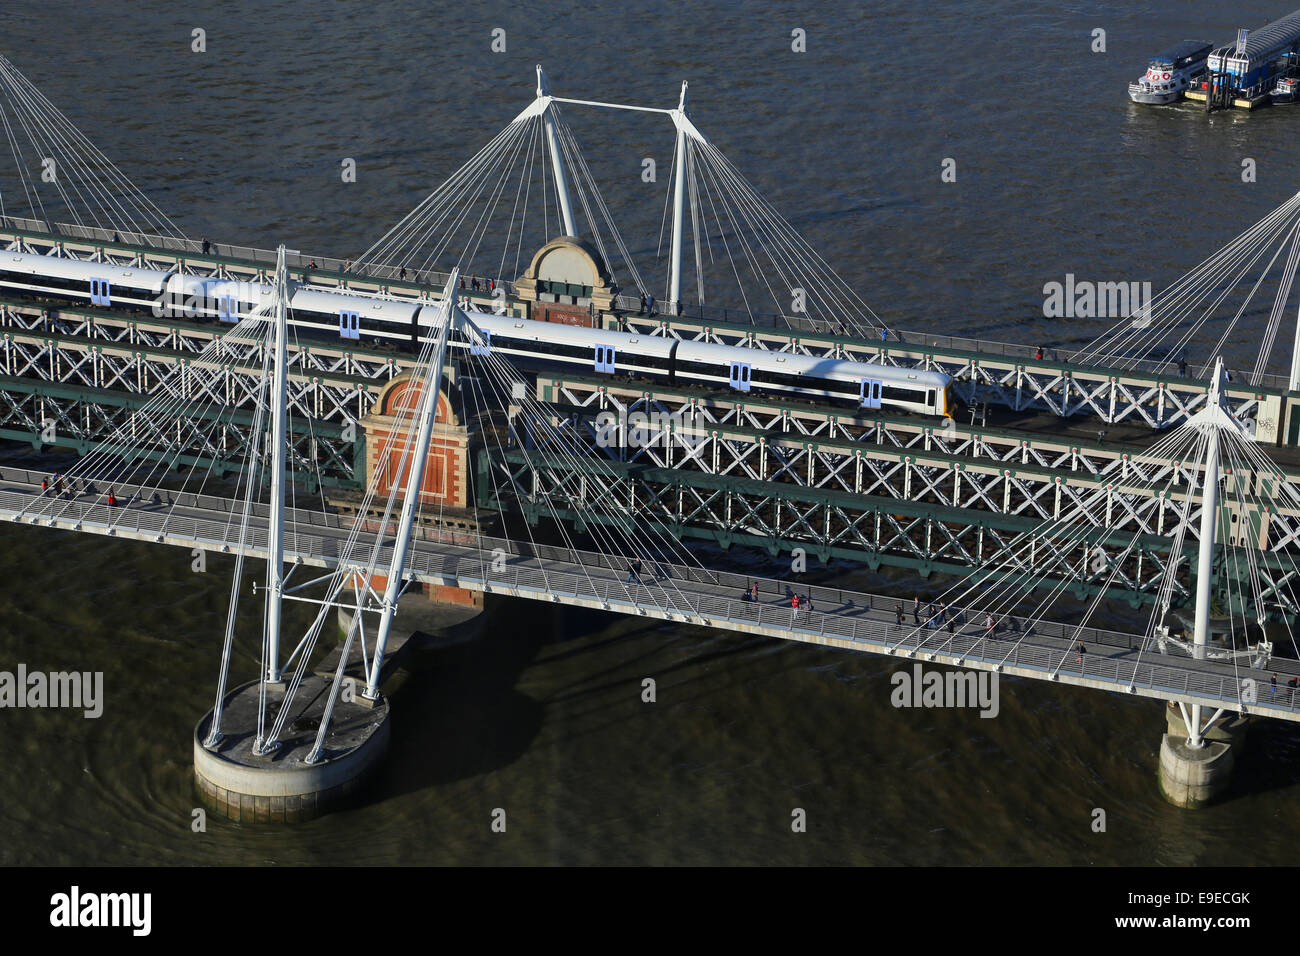 Hungerford Bridge over the River Thames with a southeastern train on the bridge viewed from the London Eye, London, England, UK Stock Photo